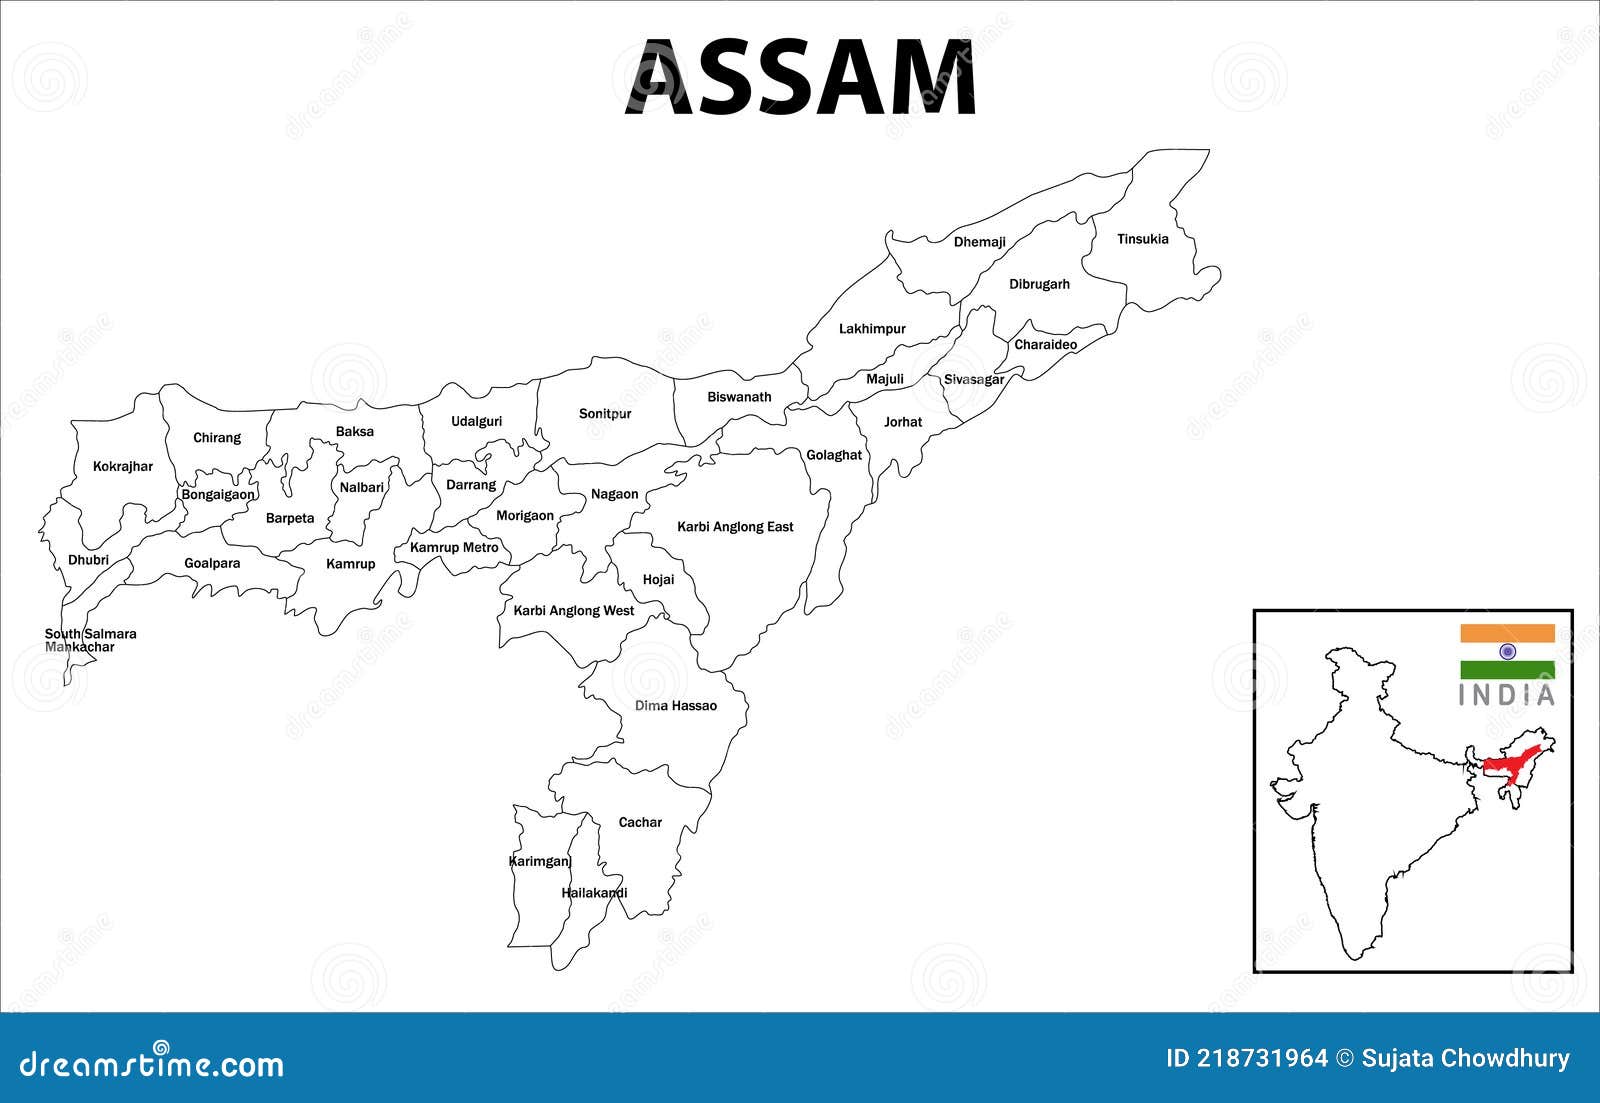 Assam Maps For Design Blank White And Black Backgrounds Line Icon Stock  Illustration - Download Image Now - iStock